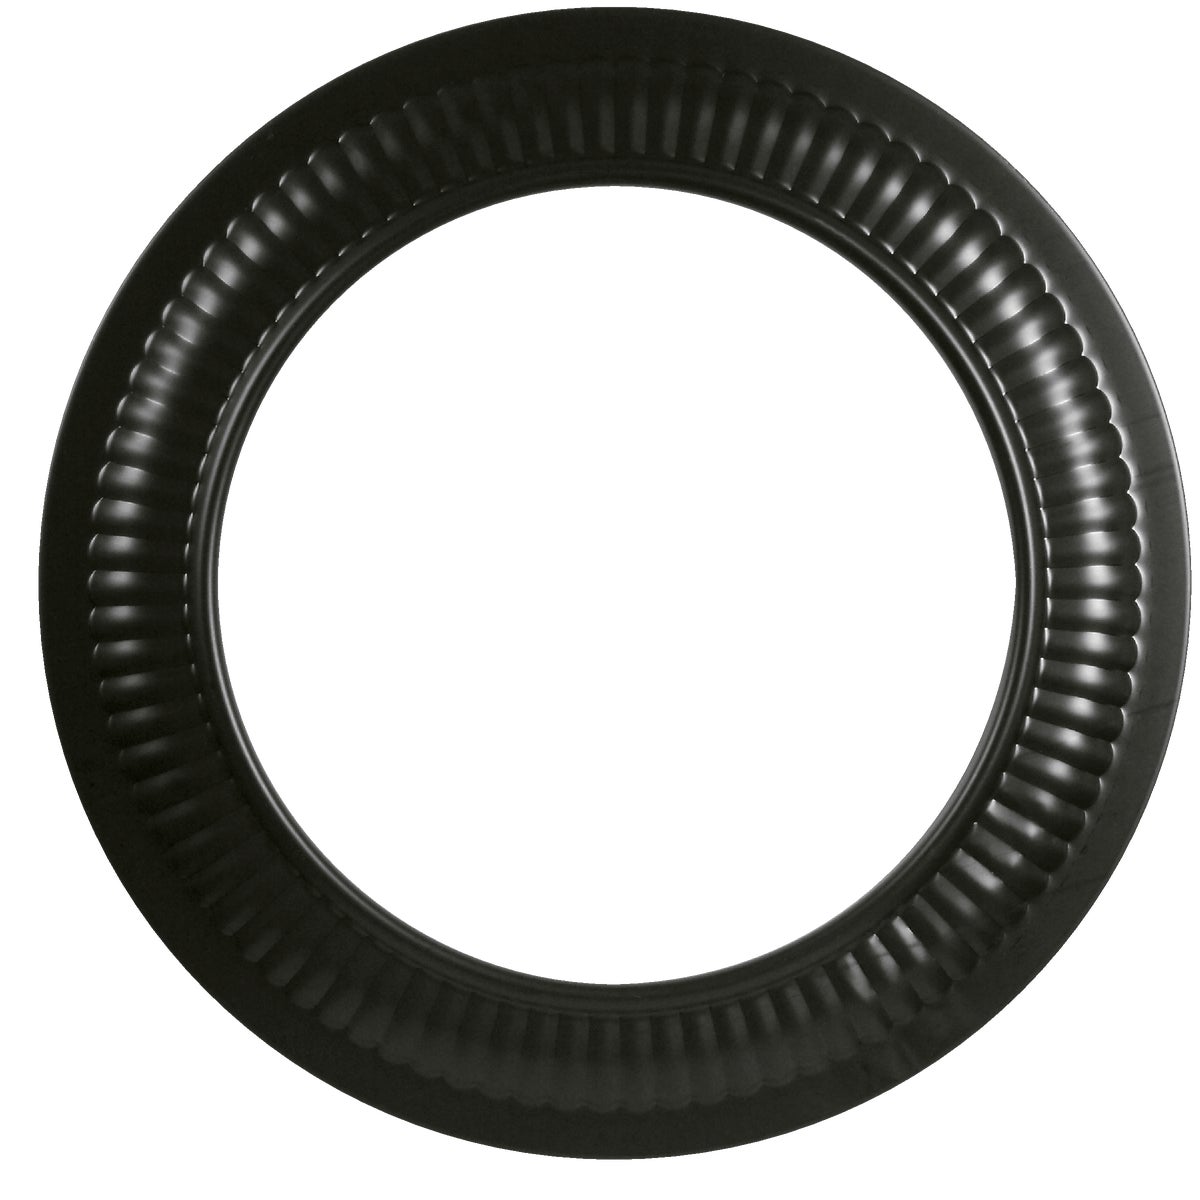 Item 420397, For use with solid fuel appliances such as woodstoves. 24-gauge.